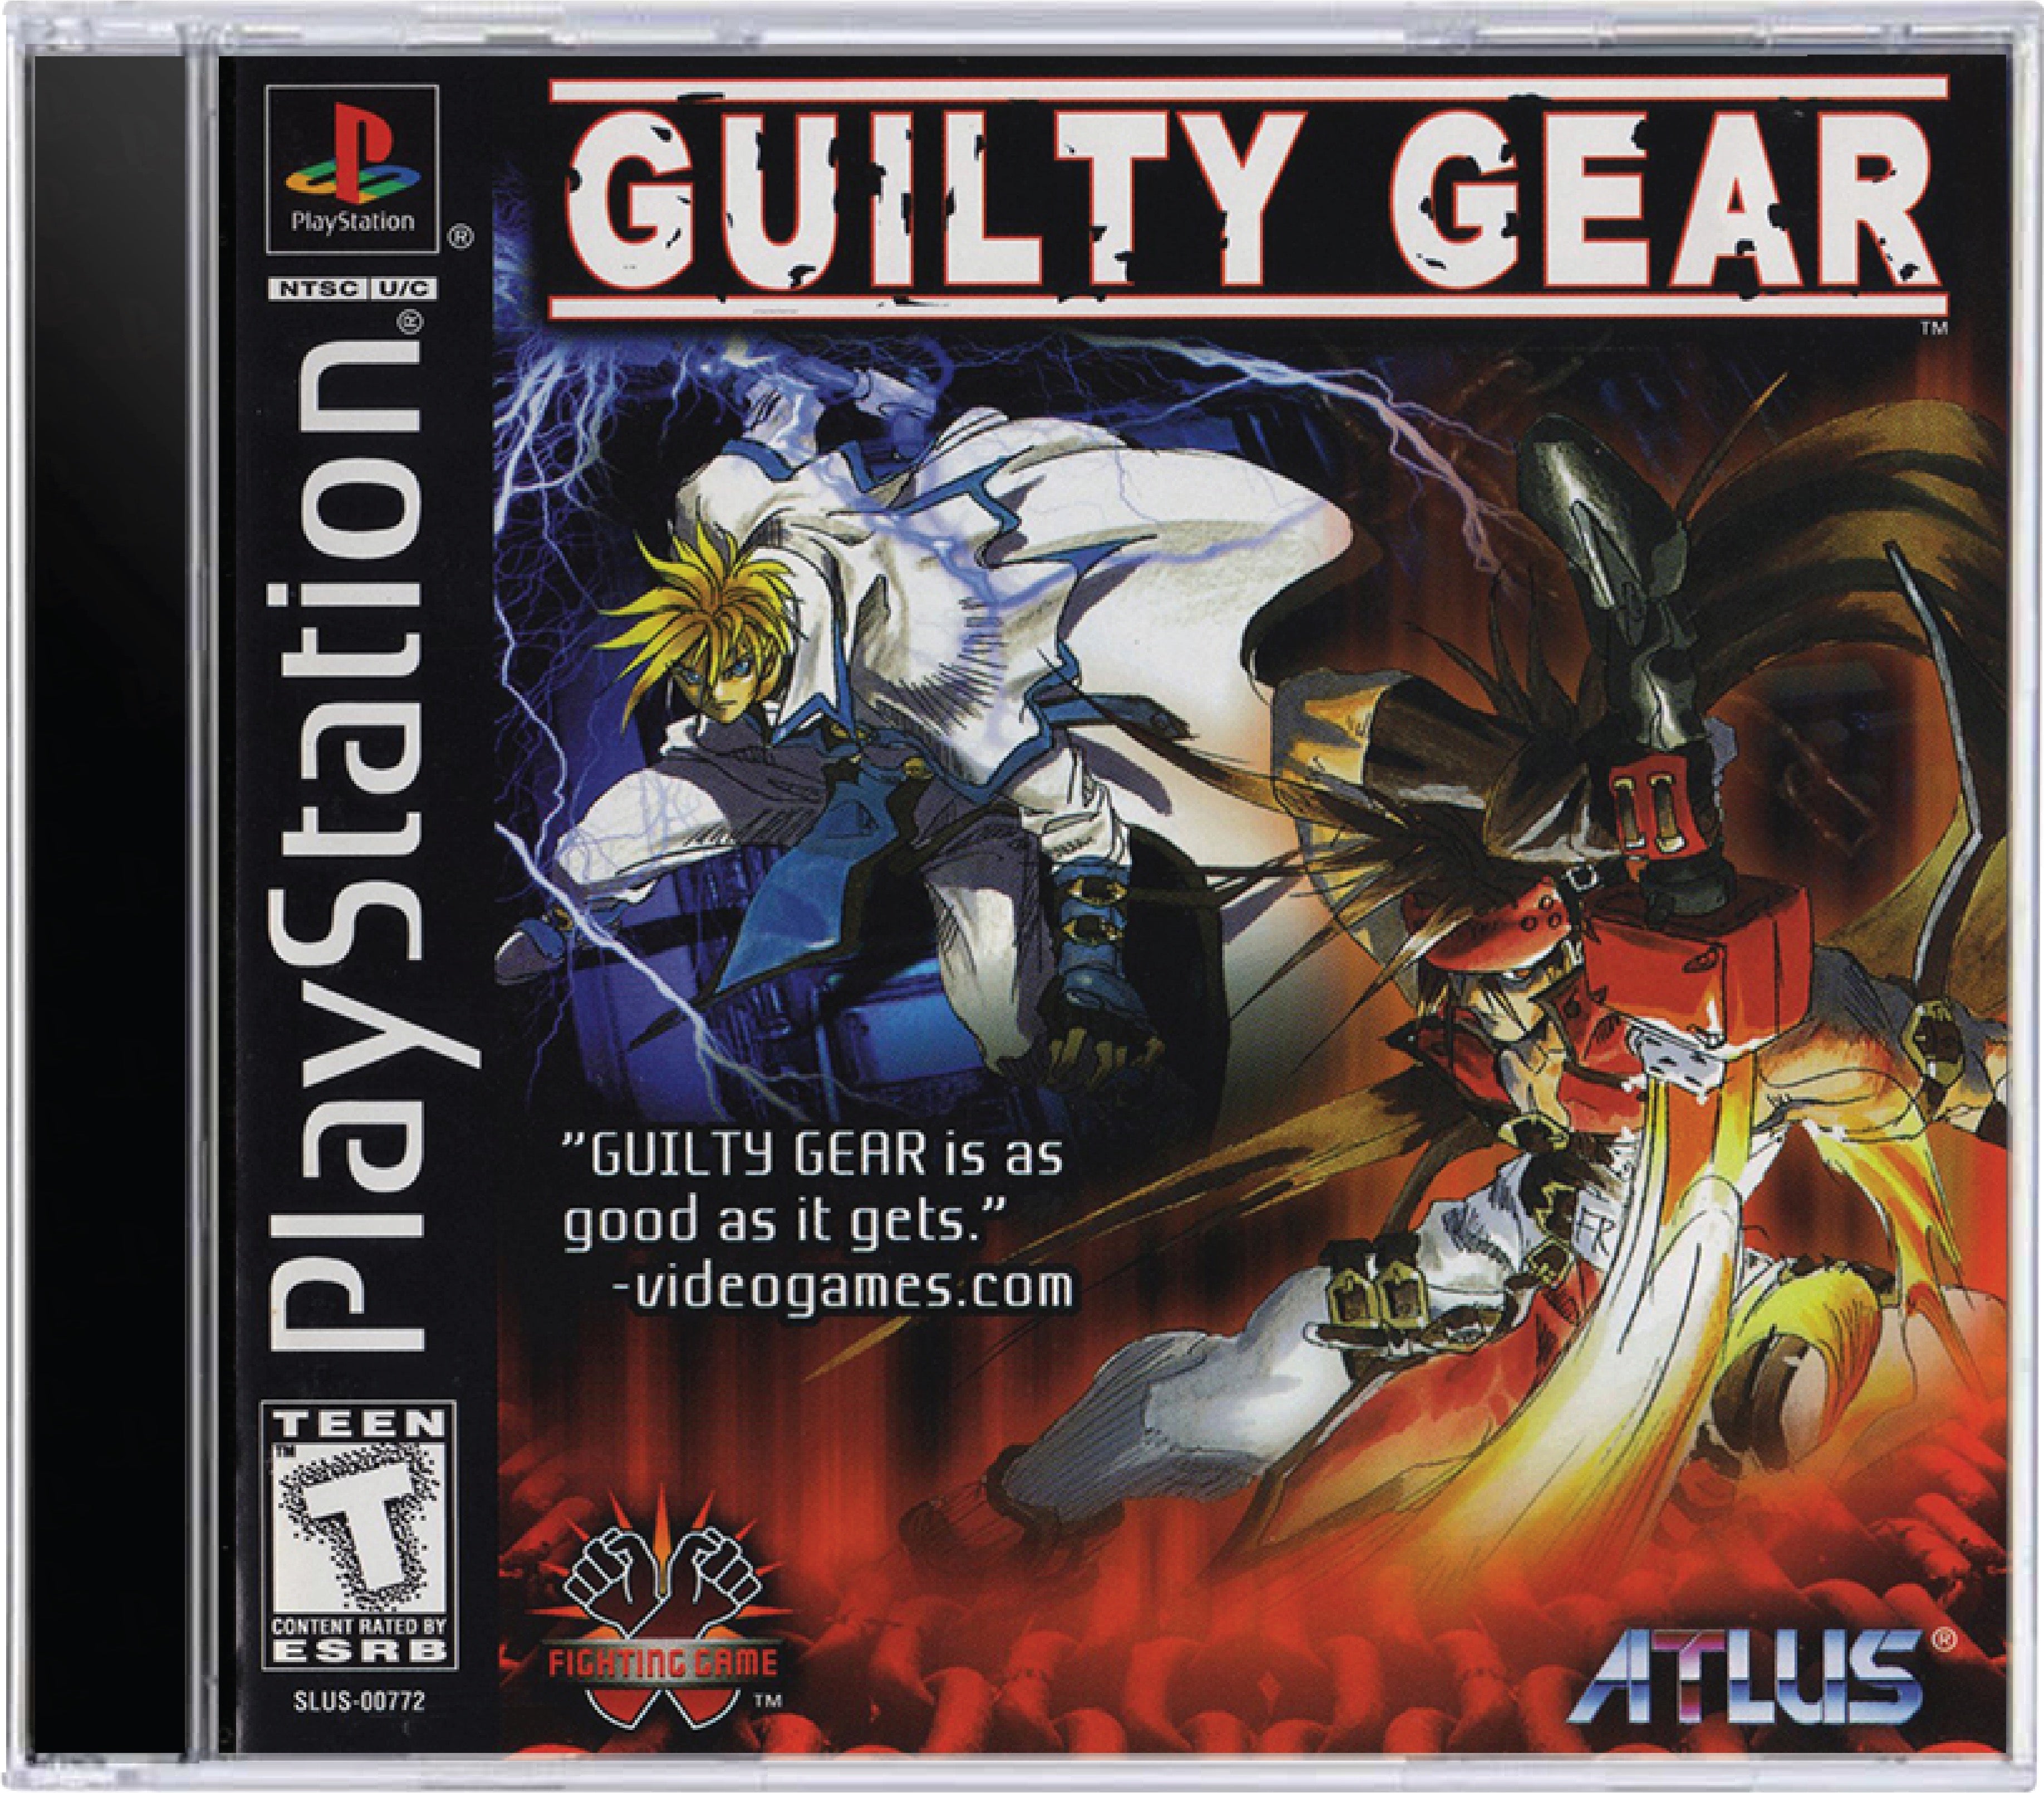 Guilty Gear Cover Art and Product Photo